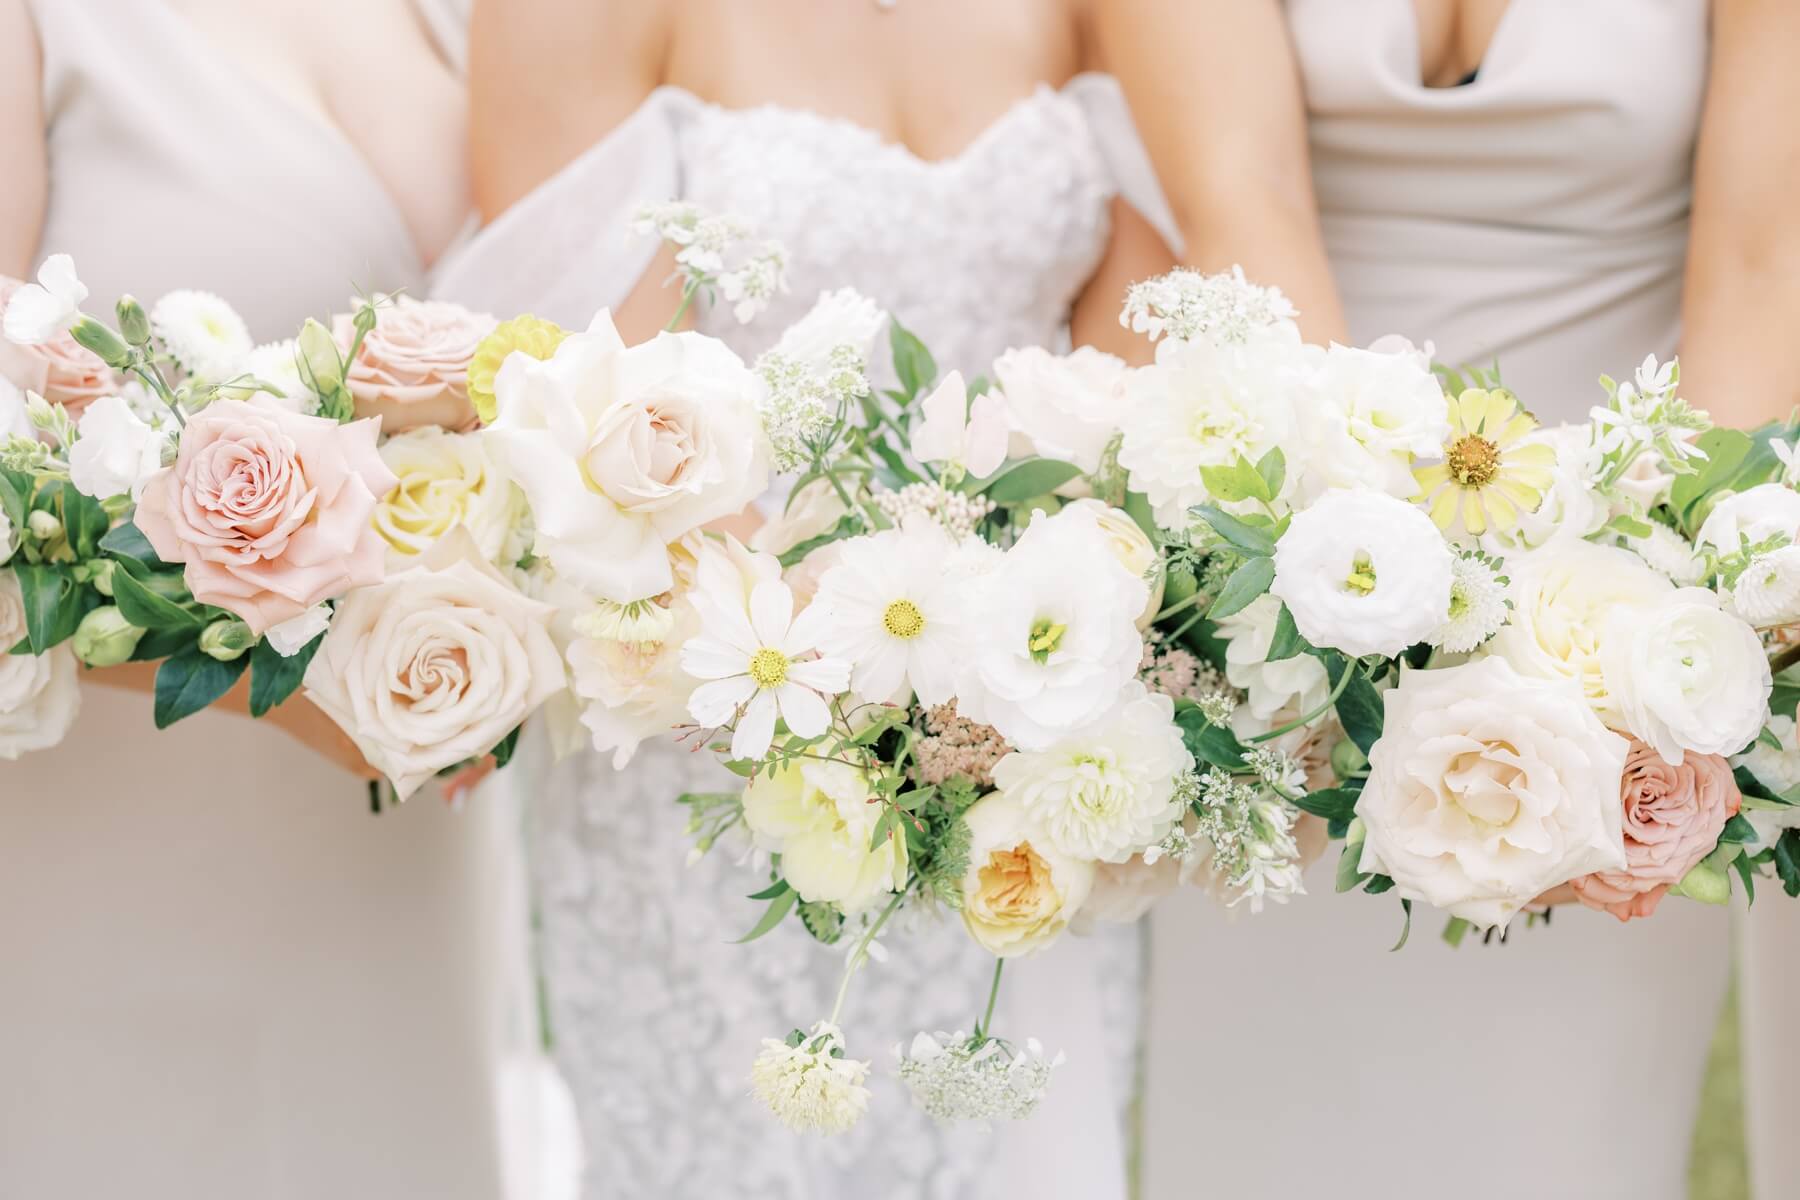 Hand tied white and pale pink and yellow wedding bouquets 